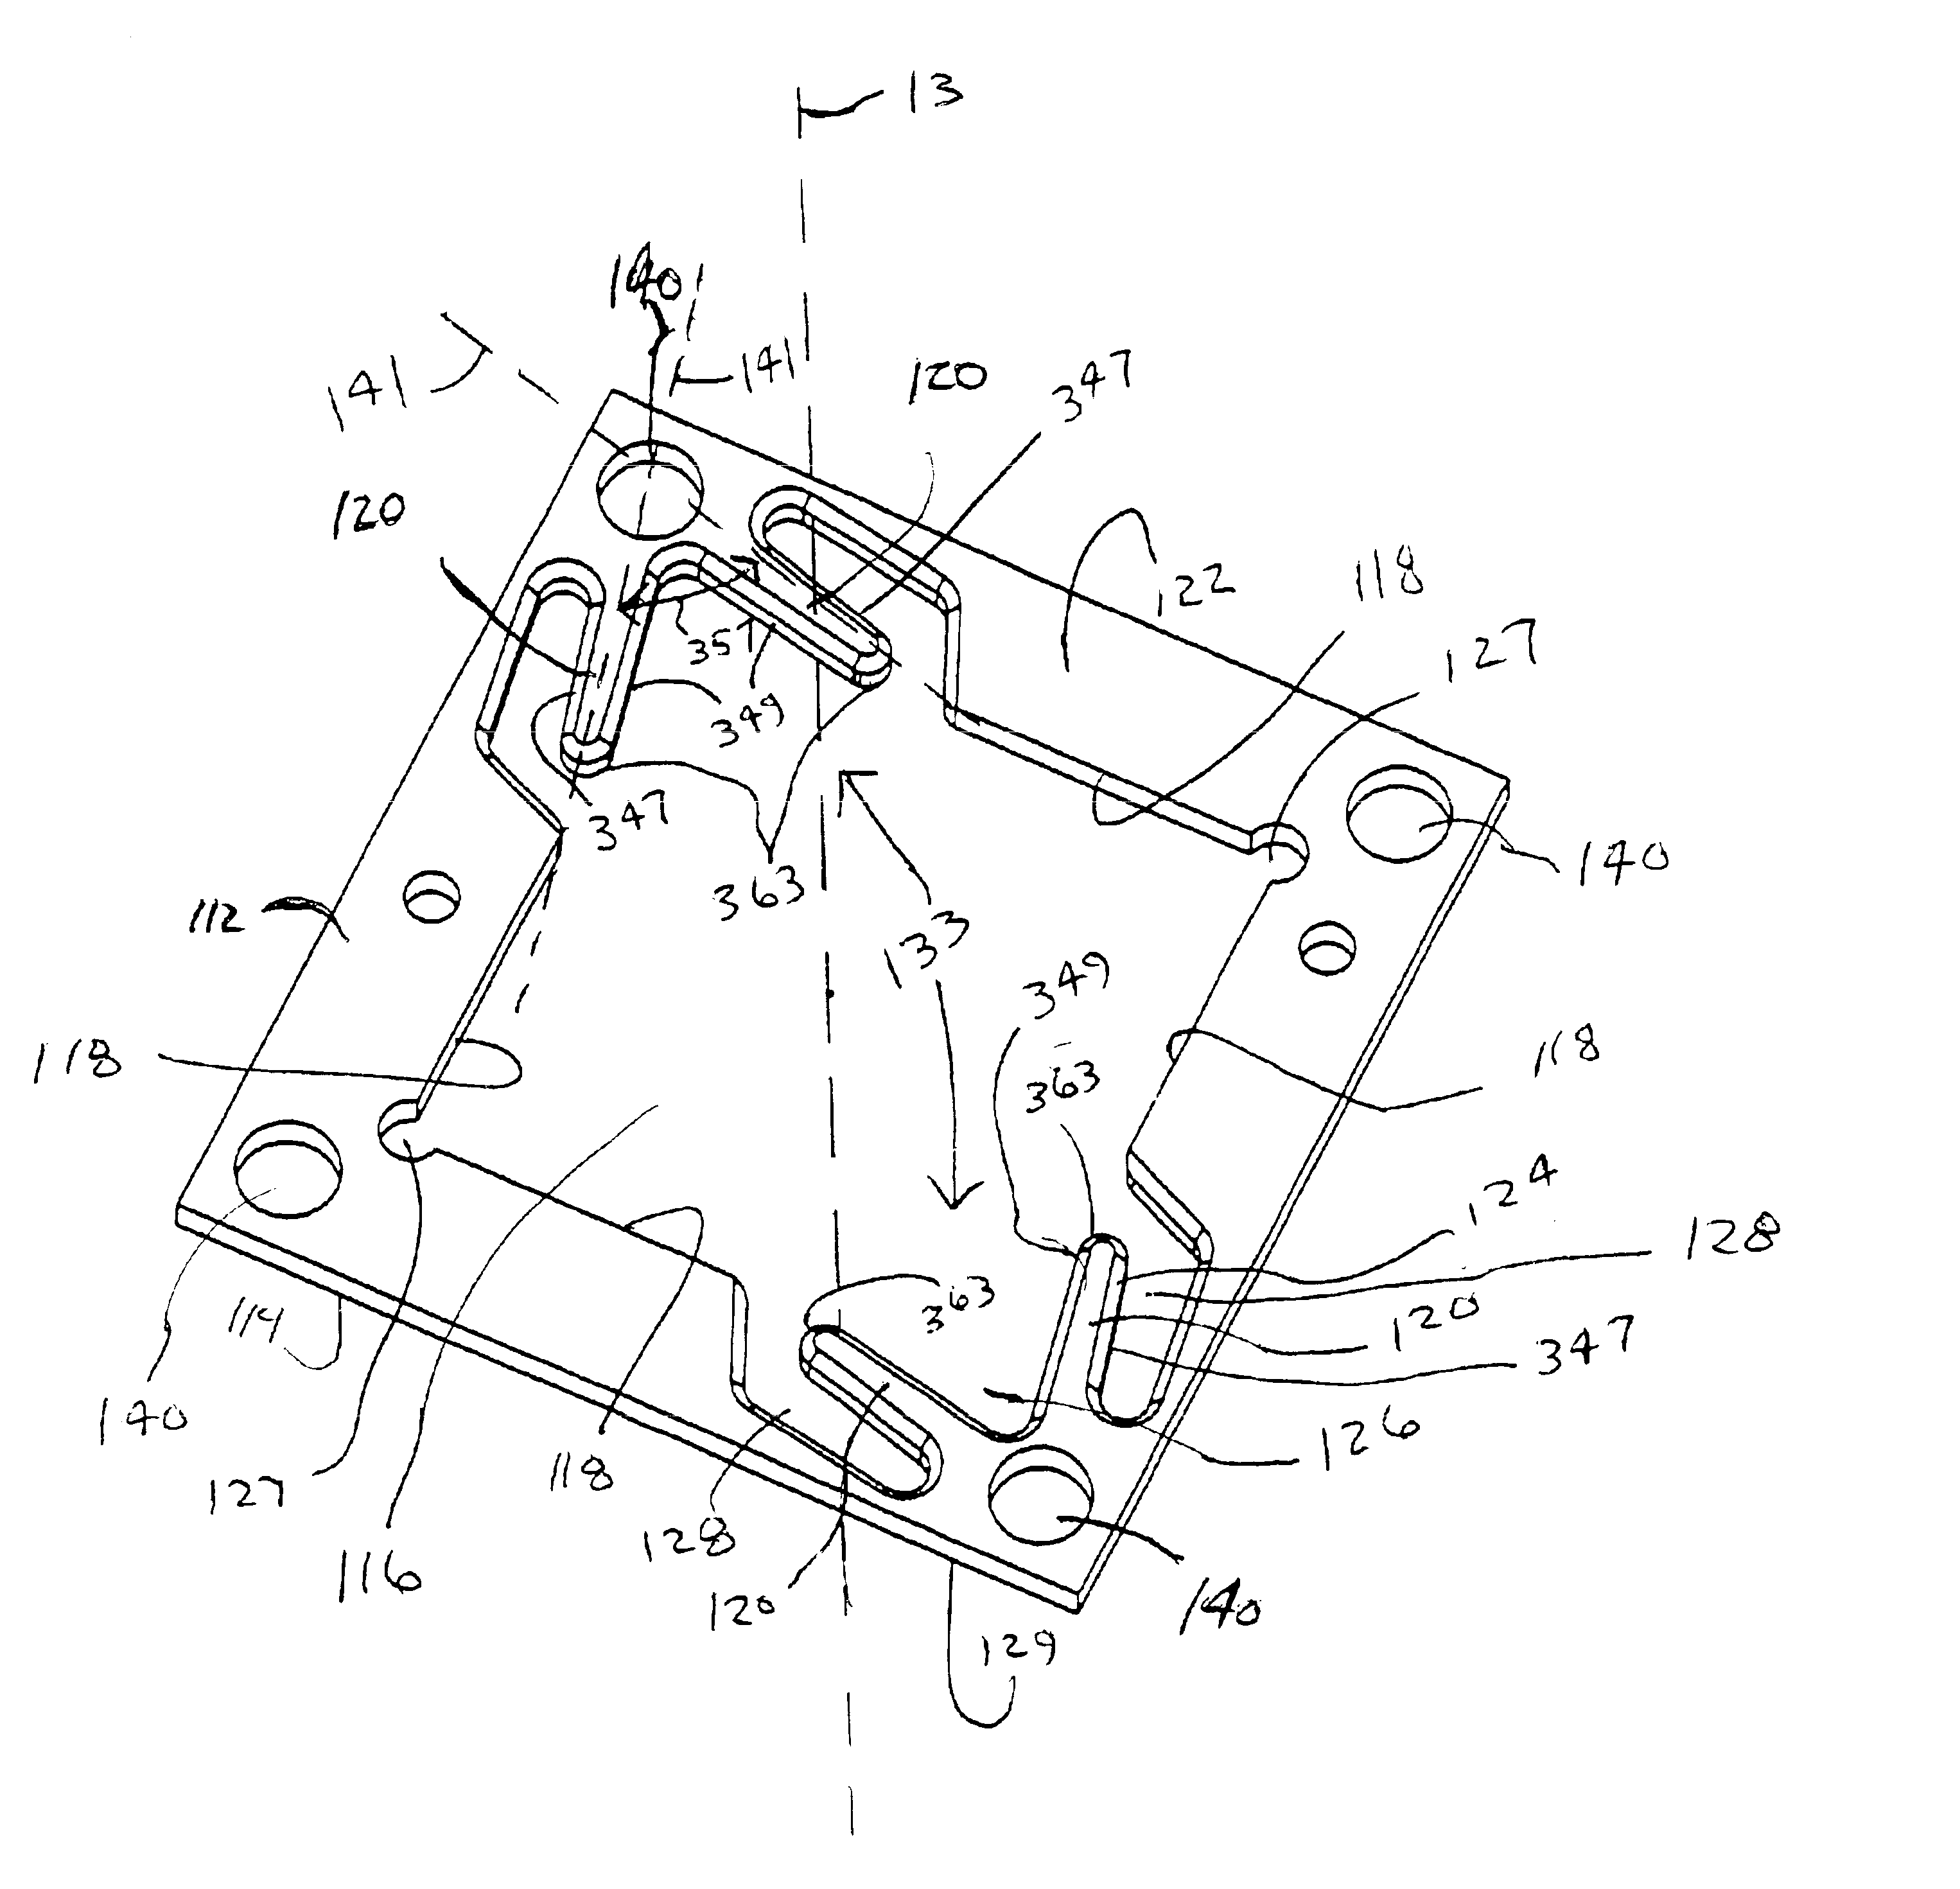 Packaged device adapter assembly with alignment structure and methods regarding same